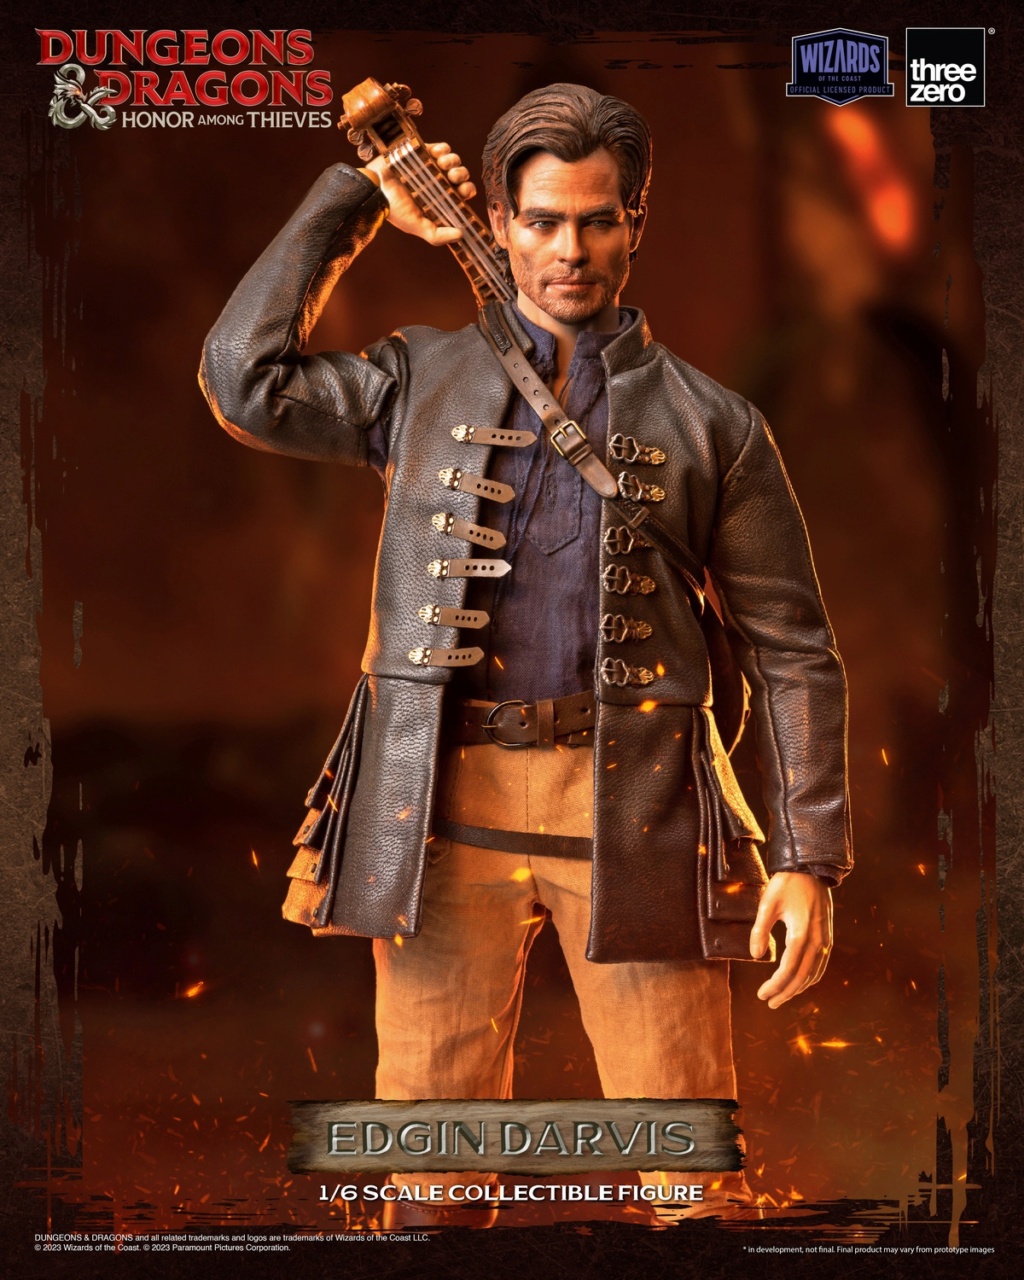 Dungeons - NEW PRODUCT: Threezero: 1/6 scale Edgin Darvis - Dungeons & Dragons: Honor Among Thieves action figure 16563010